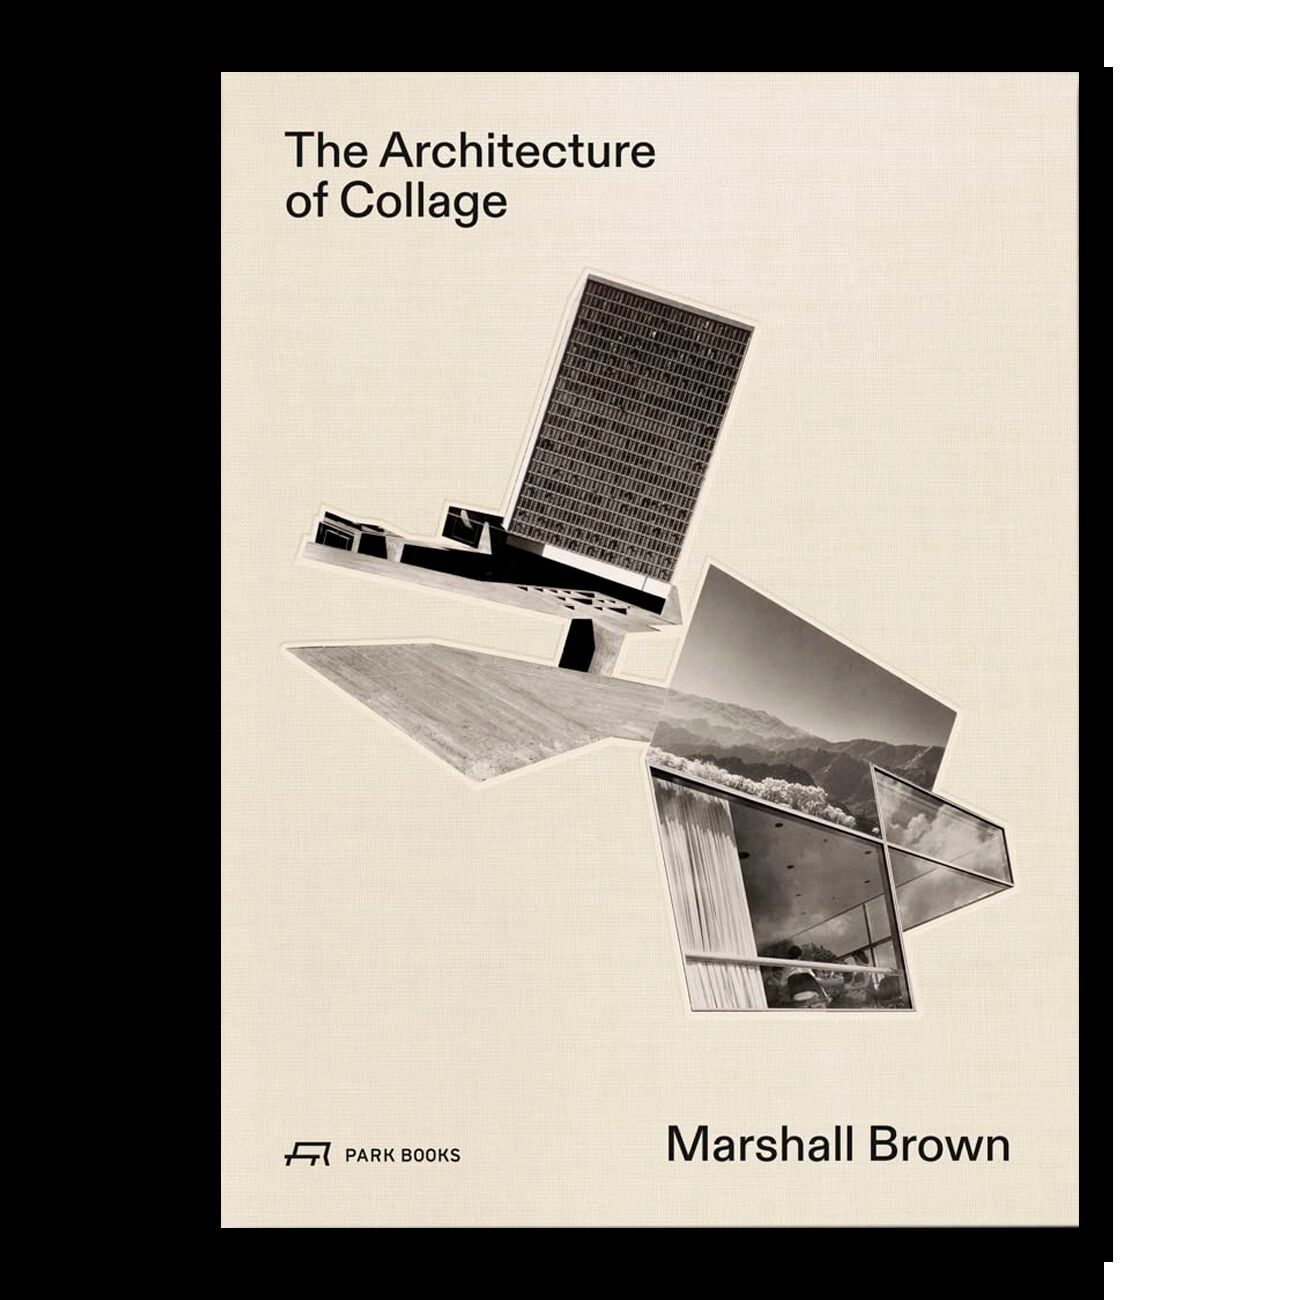 The Architecture of Collage: Marshall Brown